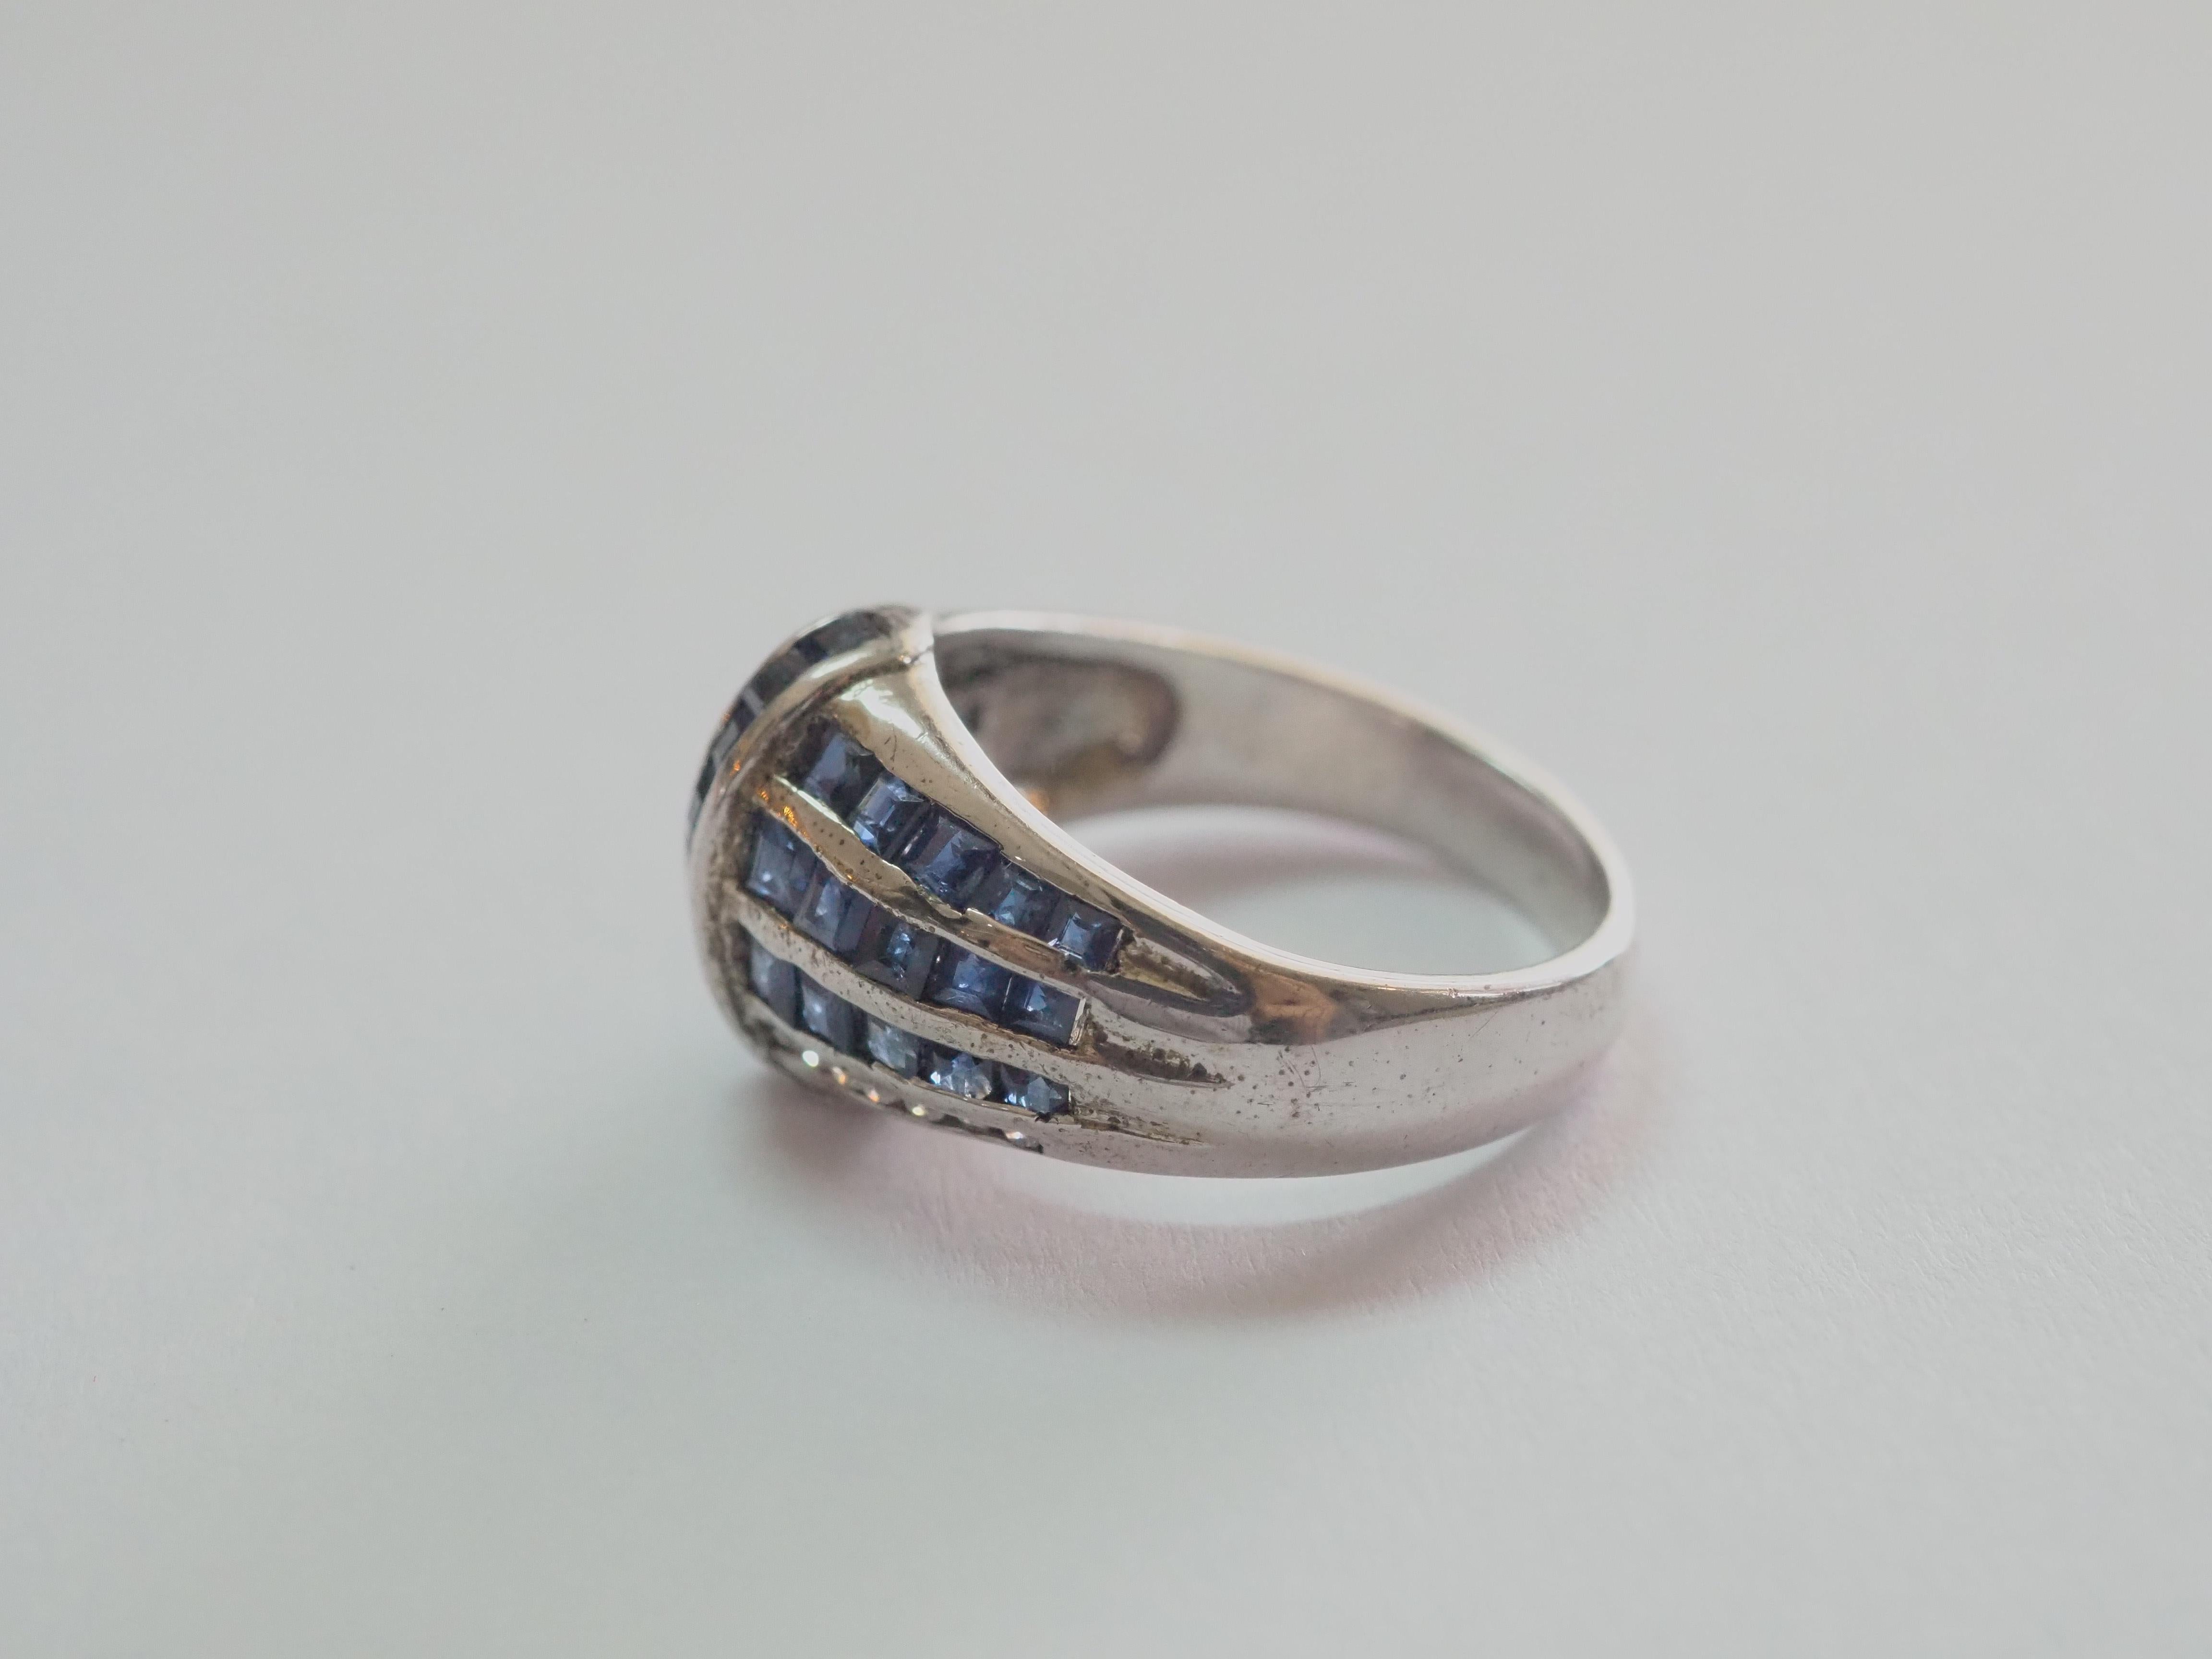 Opportunity starting at only 50!
This ring is a beautiful swirl ring in solid sterling silver. The ring is decorated by natural squared blue sapphires channeled into many lines overlapping one another. The white stone are Cubic Zirconia. The blue